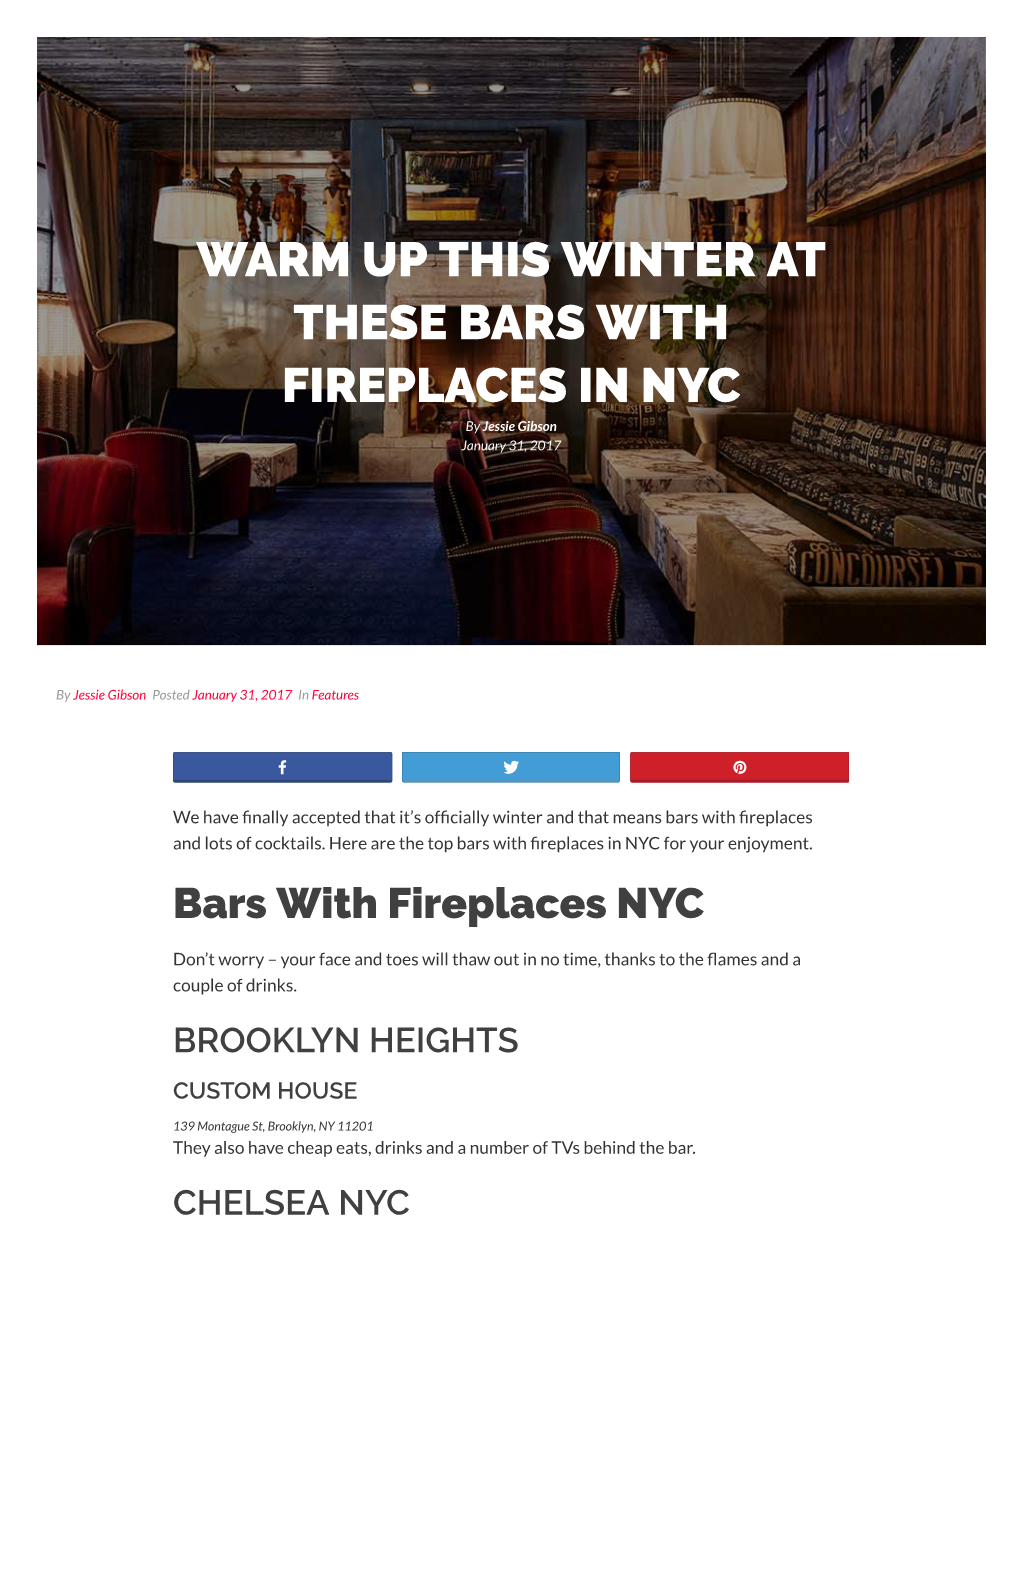 WARM up THIS WINTER at THESE BARS with FIREPLACES in NYC by Jessie Gibson January 31, 2017